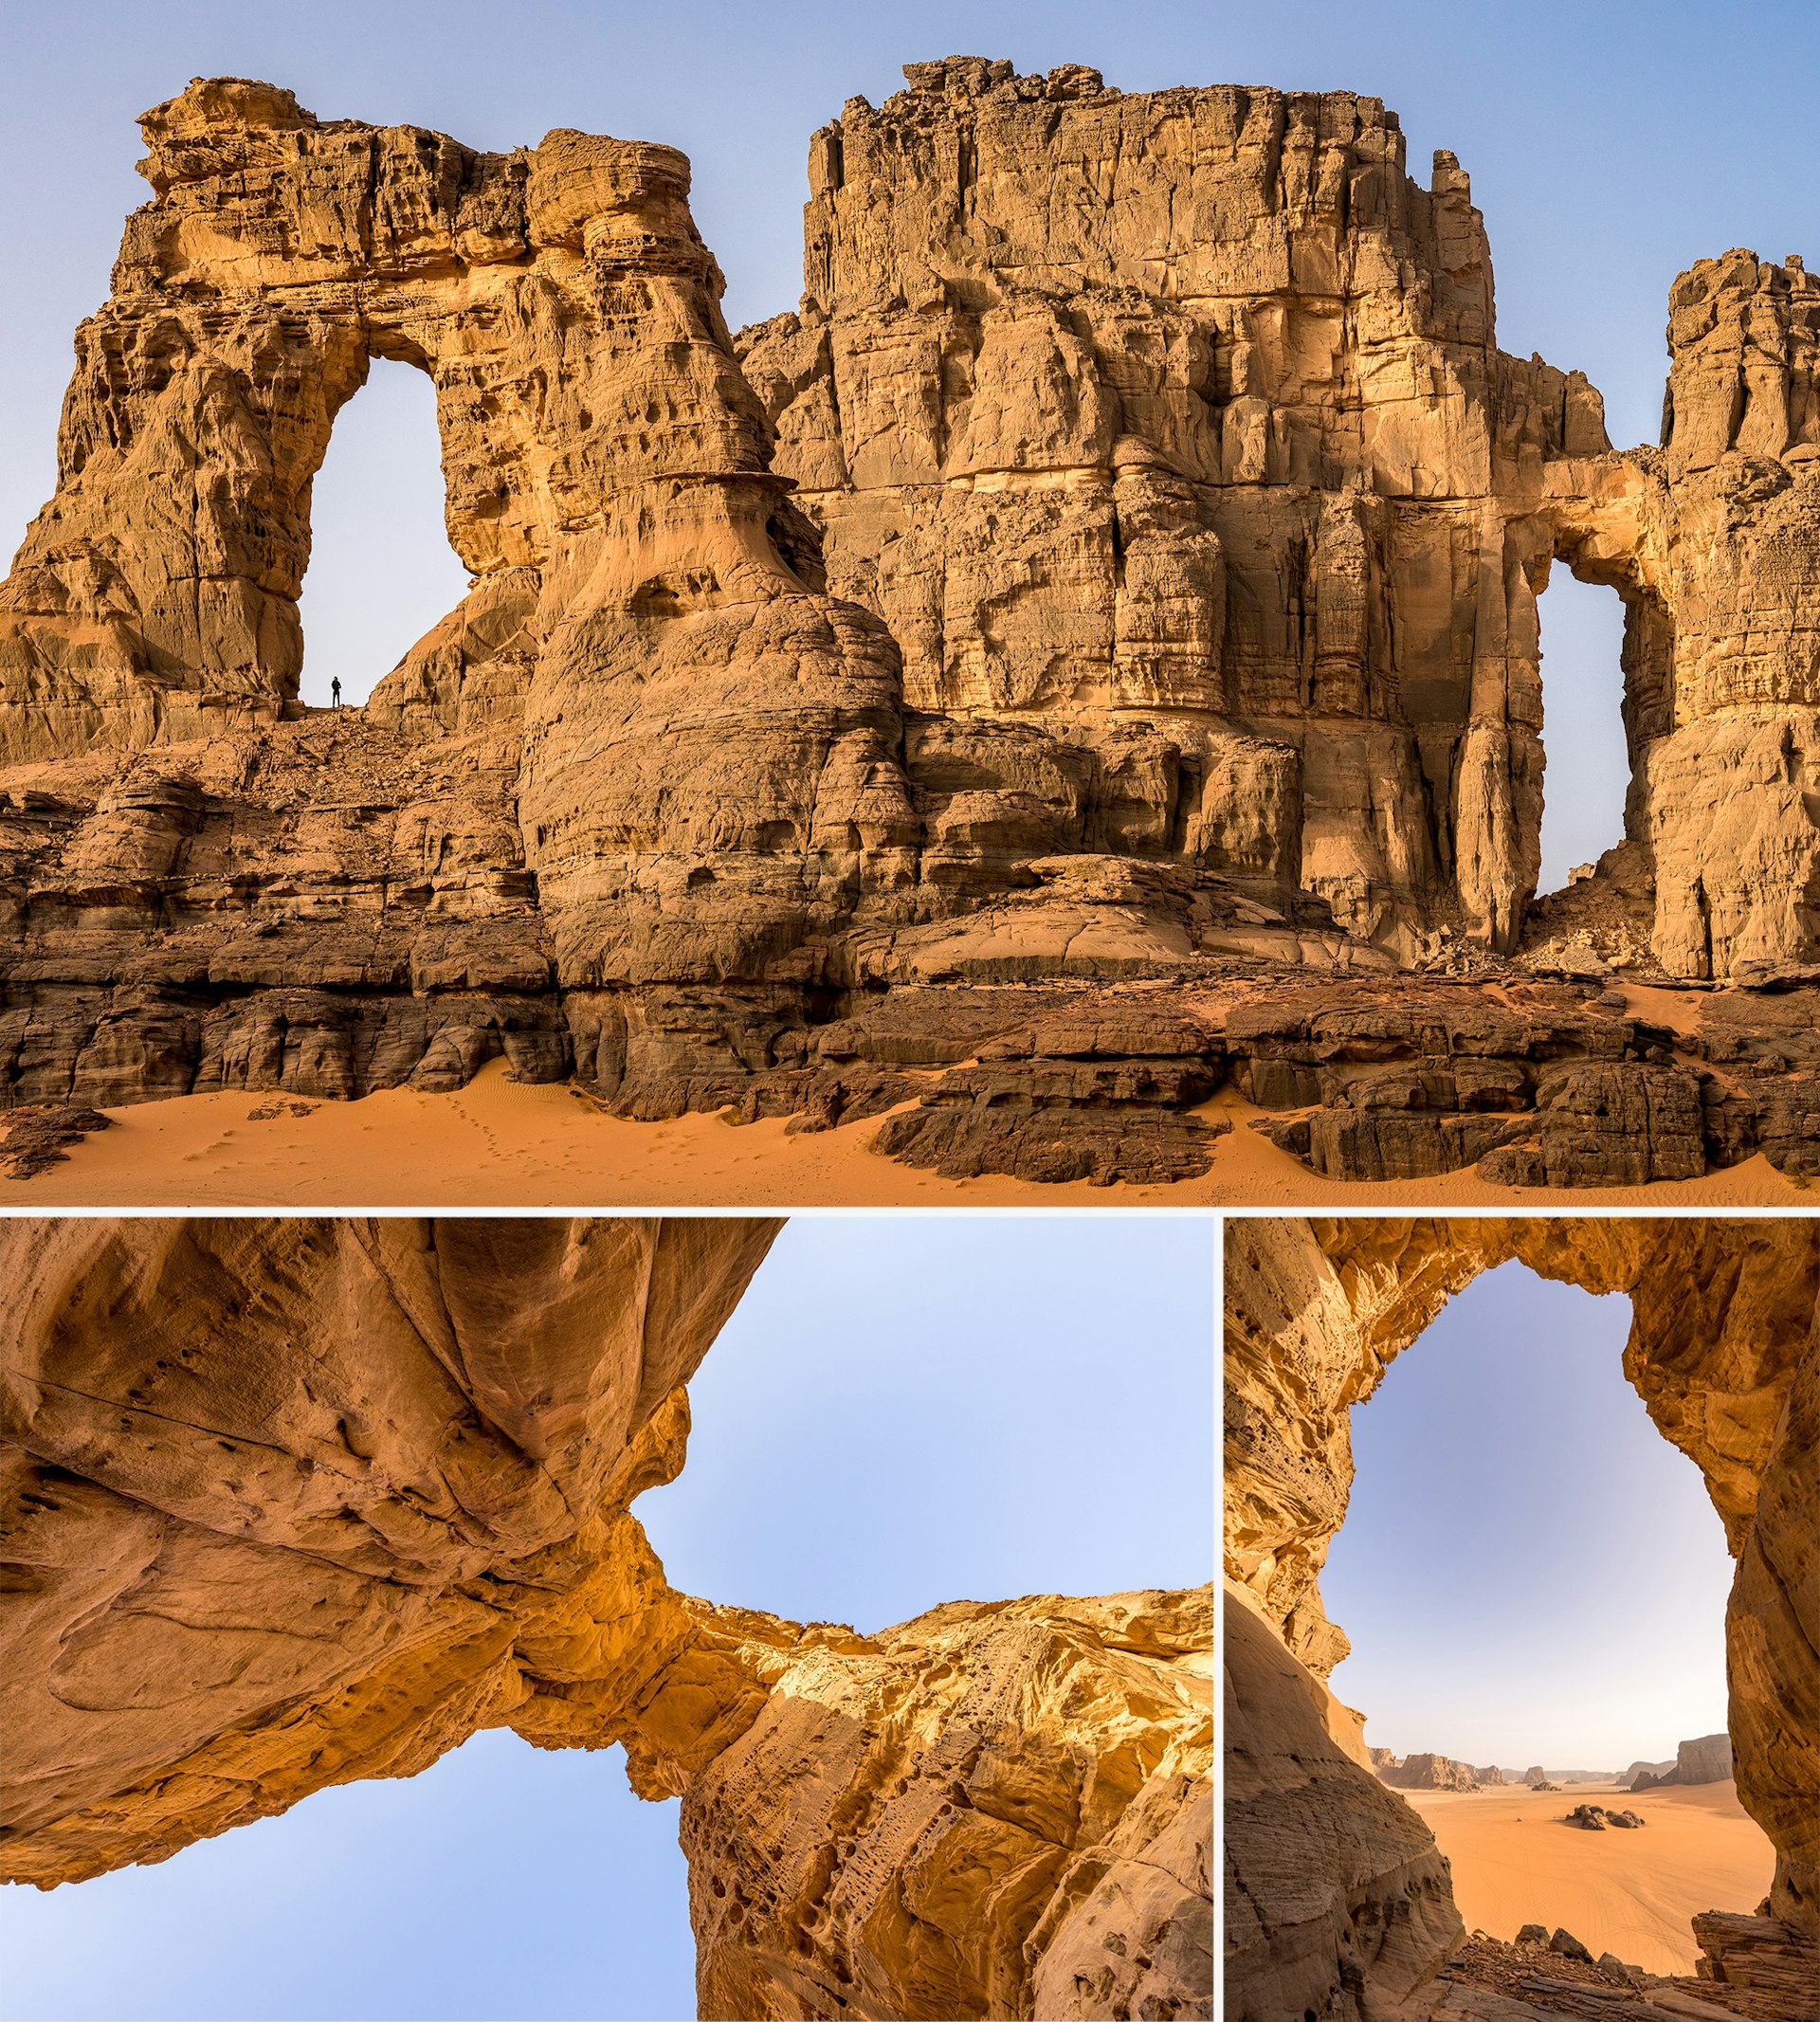 The Cathedral rock formation in Tassili National Park